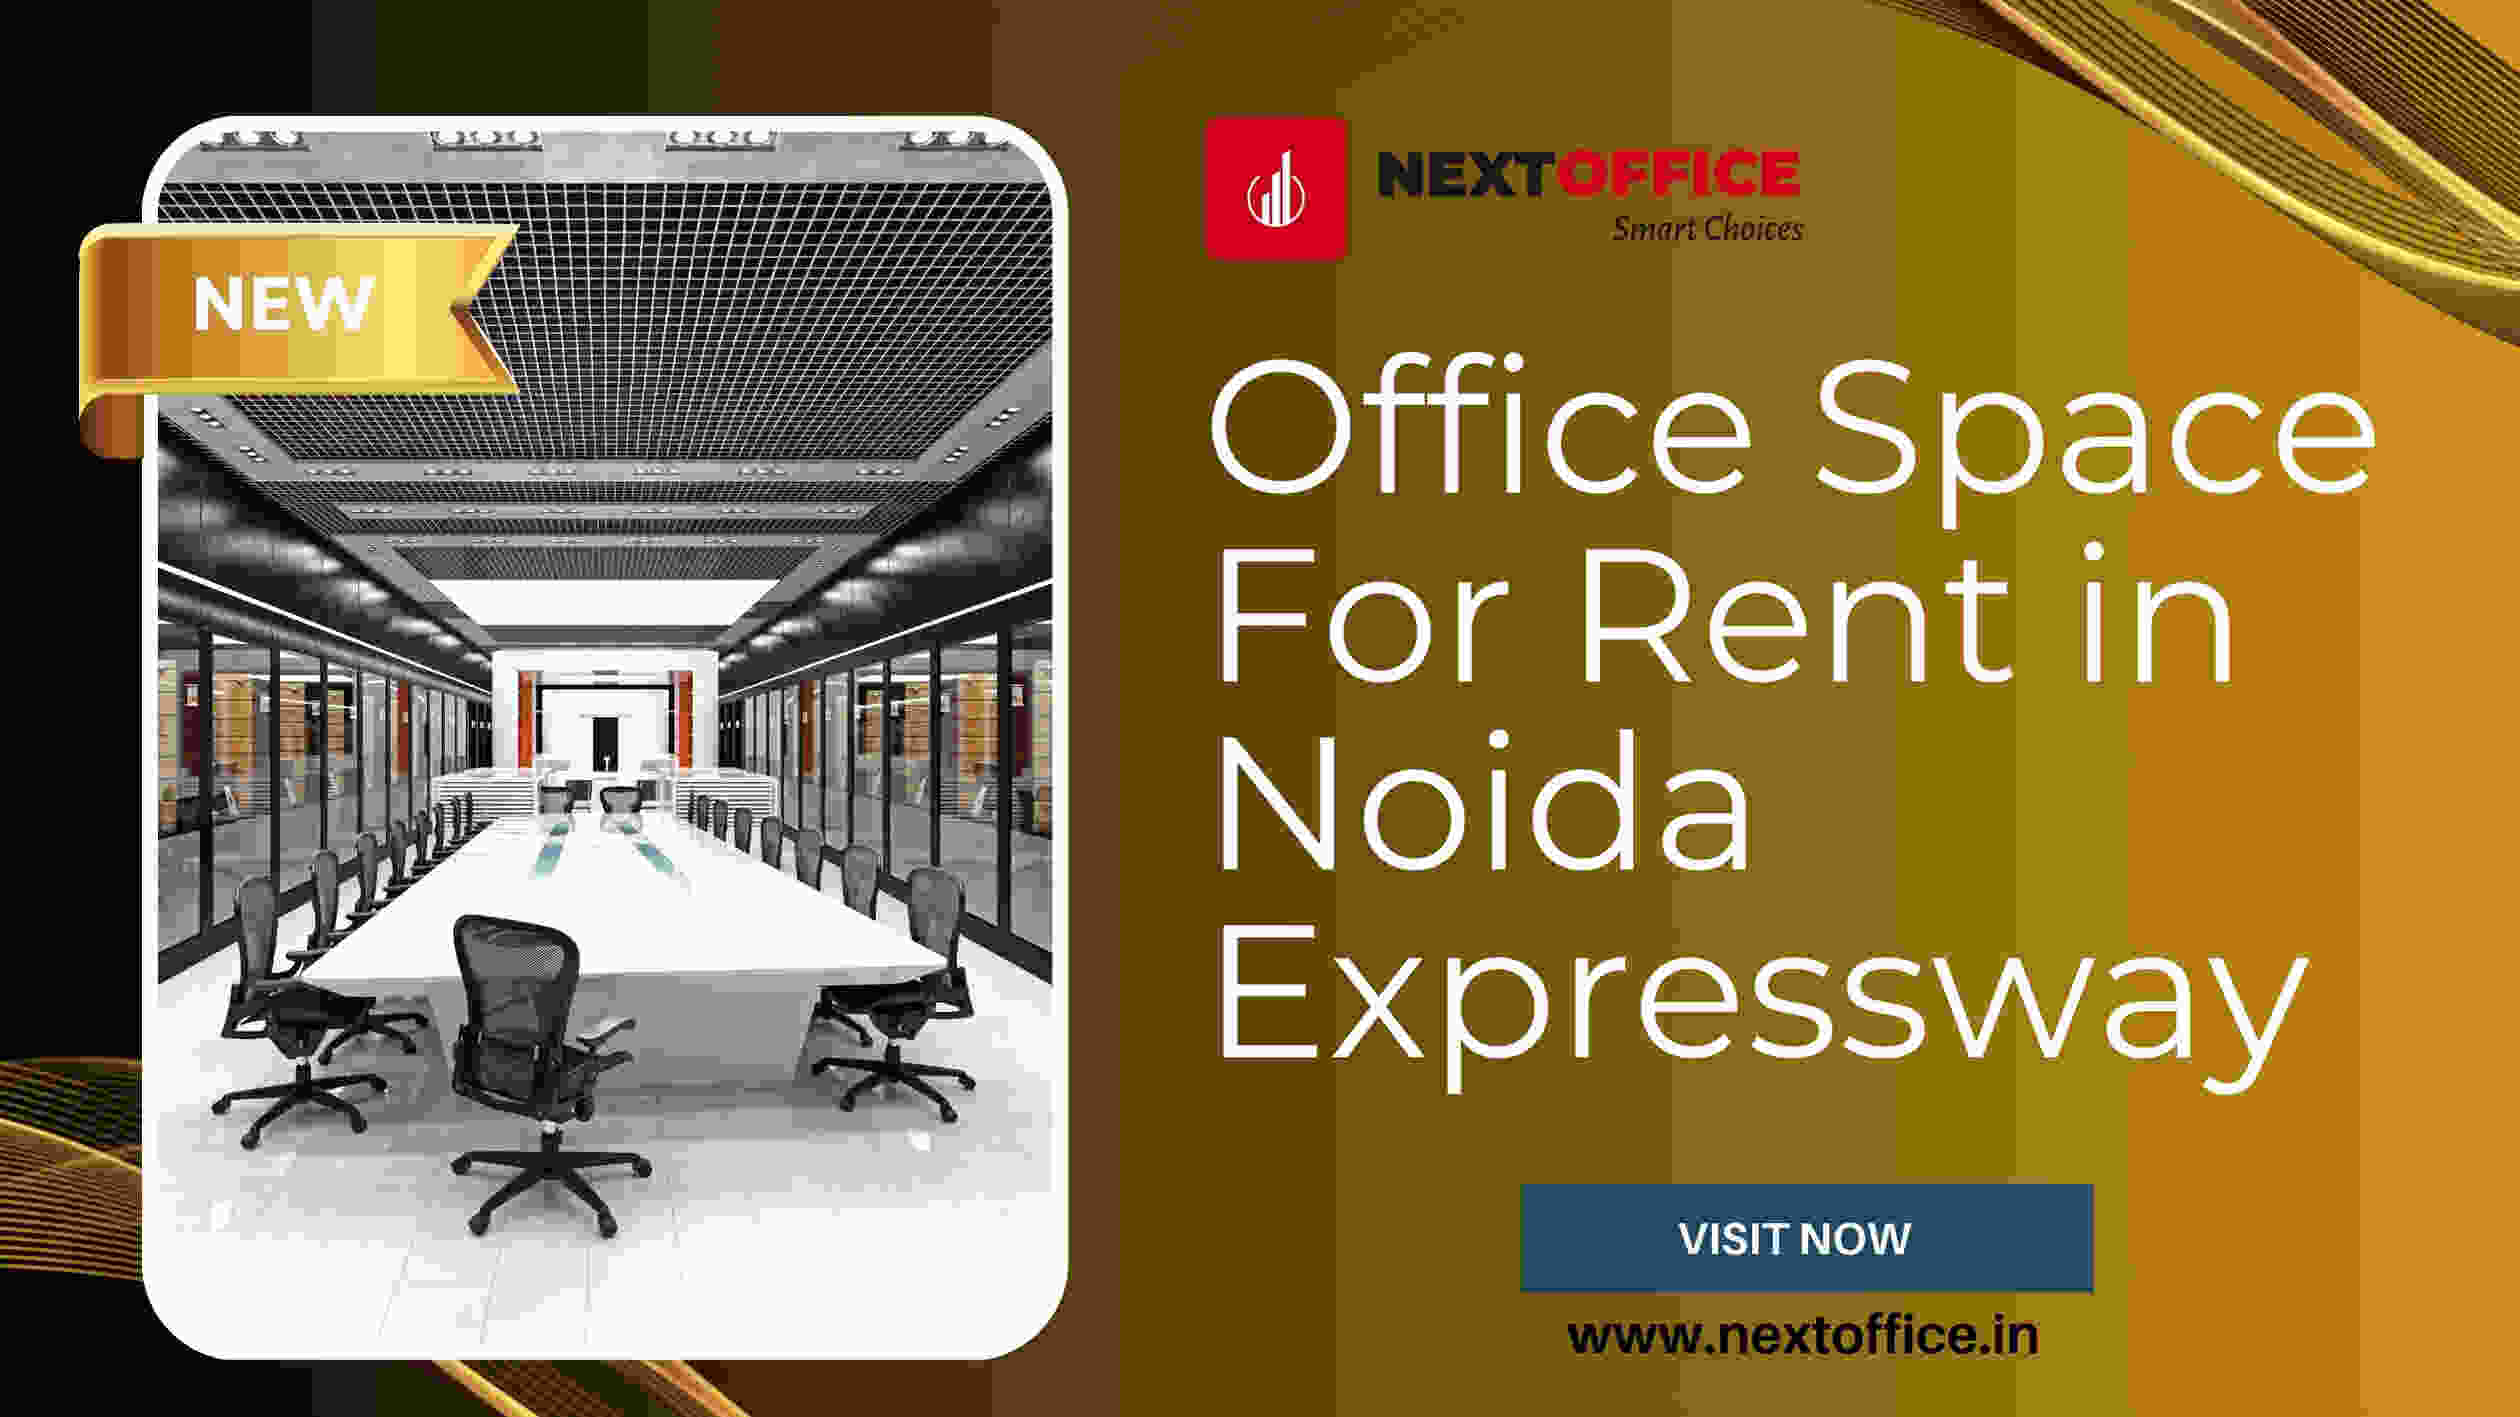 Office Space For Rent in Noida Expressway - Delhi Offices